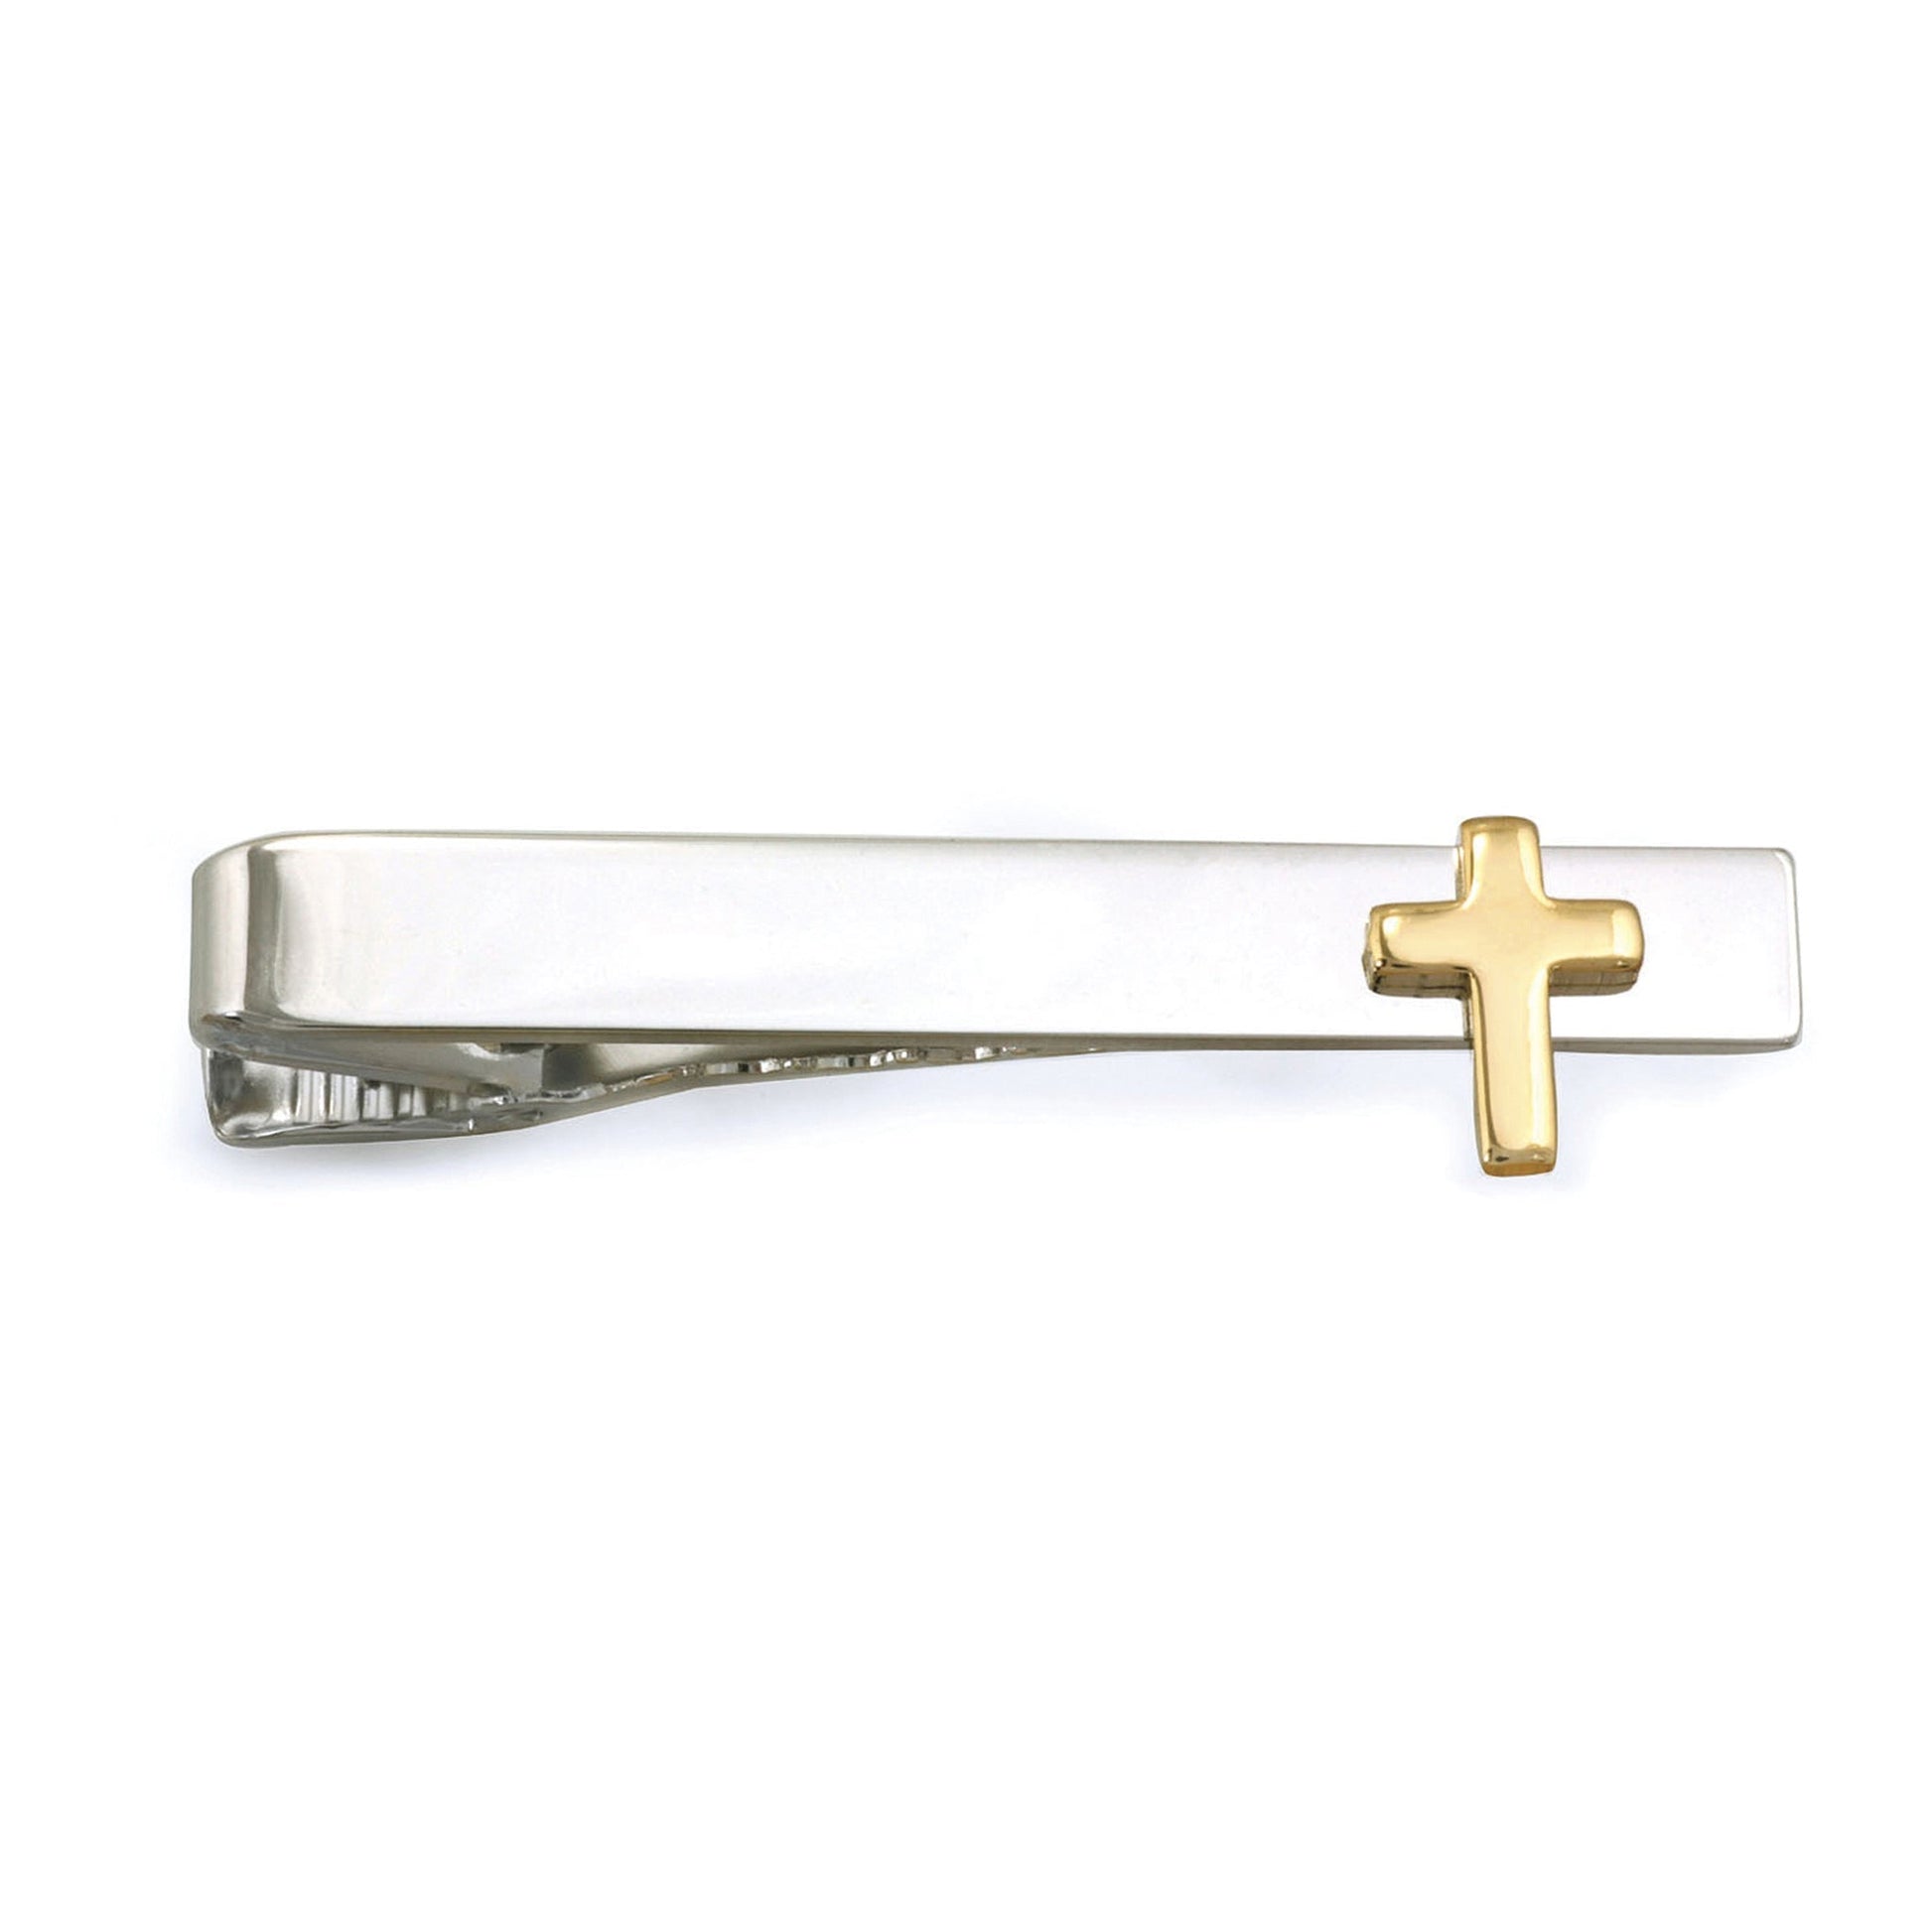 A tie bar with cross displayed on a neutral white background.